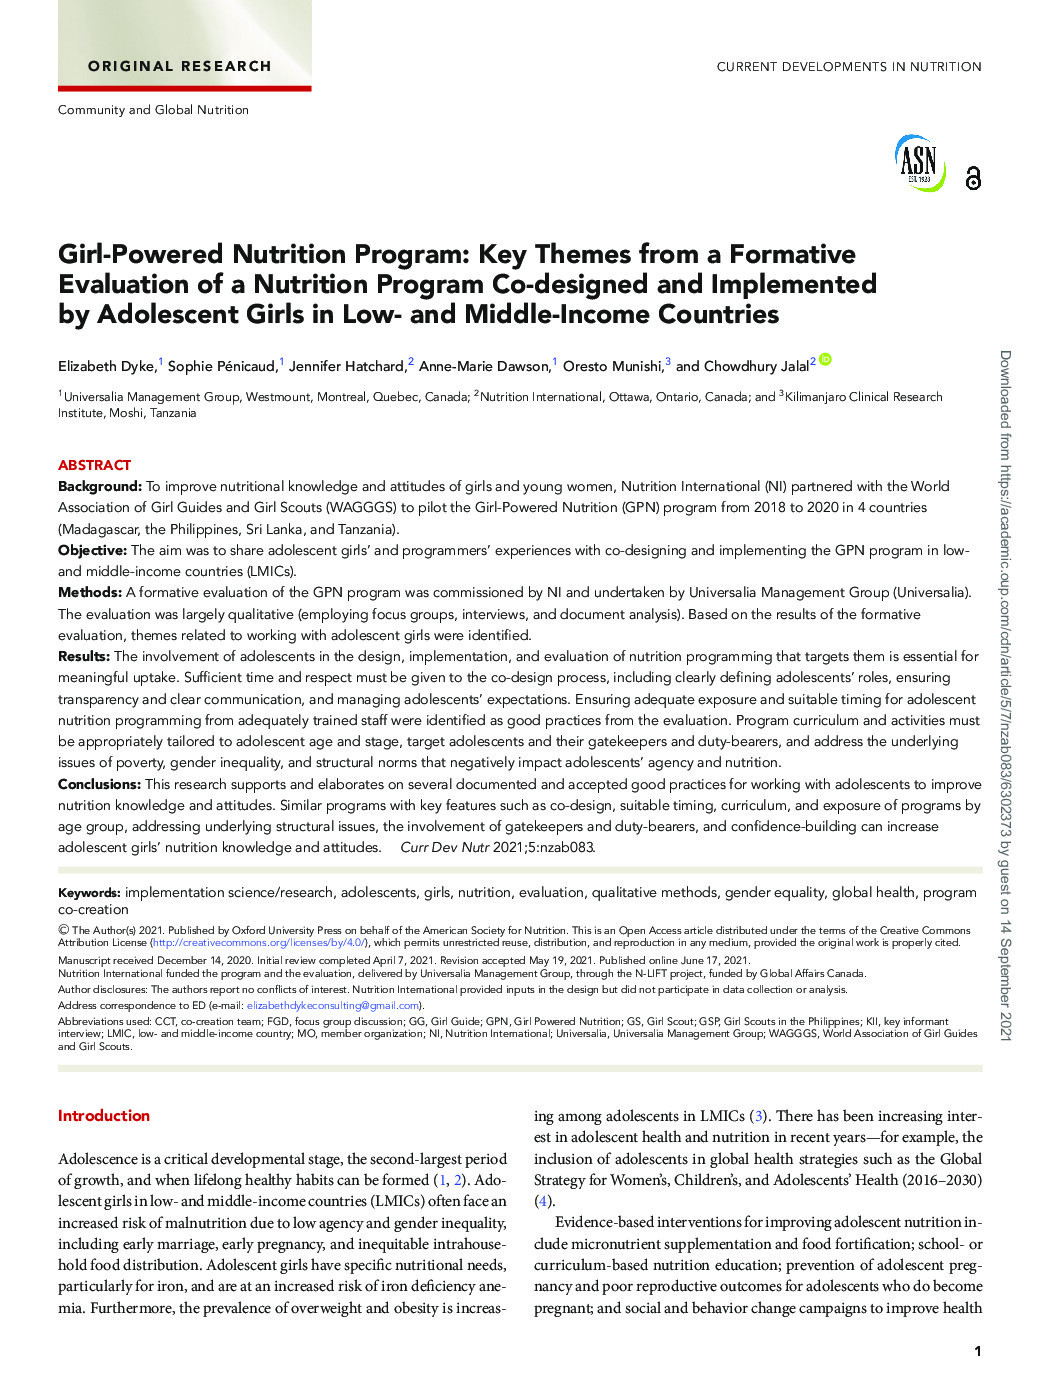 Girl-Powered Nutrition Program: Key Themes from a Formative Evaluation of a Nutrition Program Co-designed and Implemented by Adolescent Girls in Low- and Middle-Income Countries thumbnail